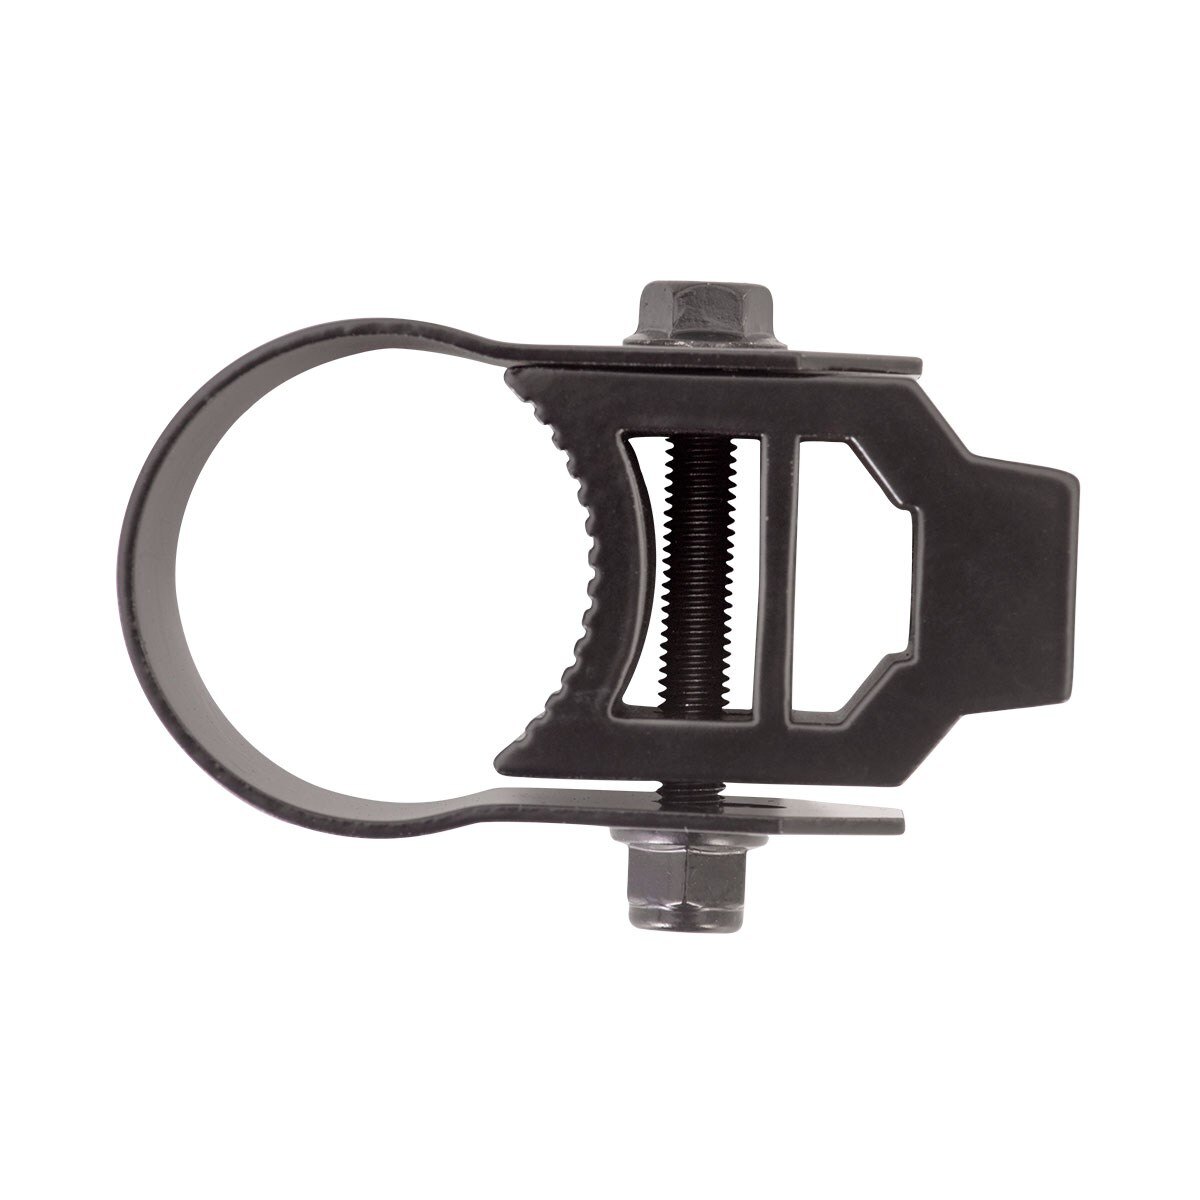 Centre Mirror Rollover Protection System Clamp